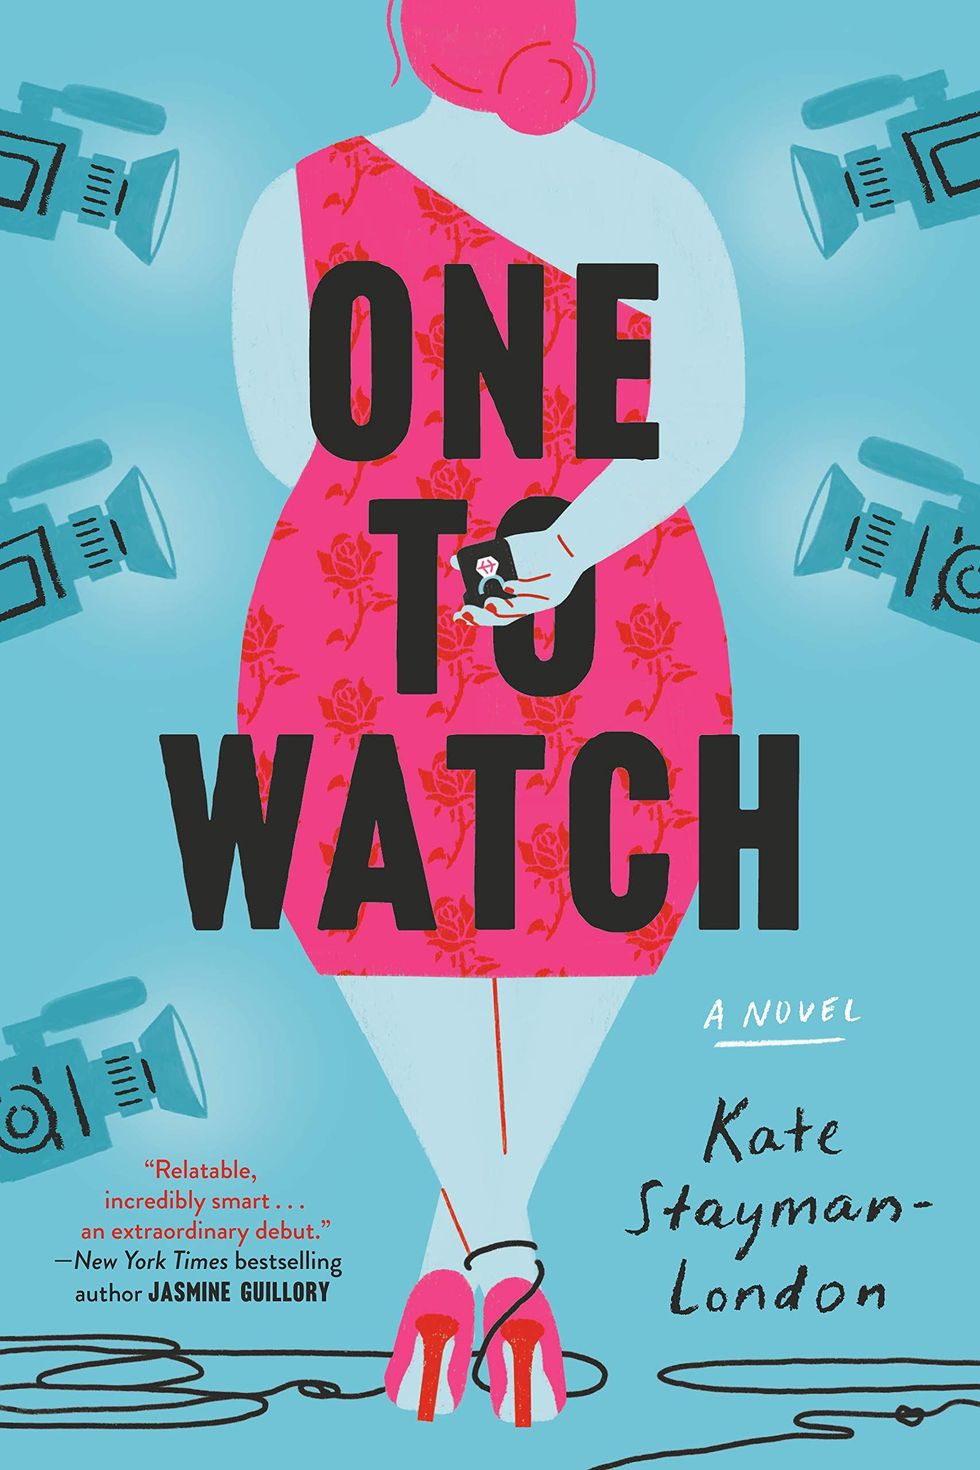 ‘One to Watch’ by Kate Stayman-London